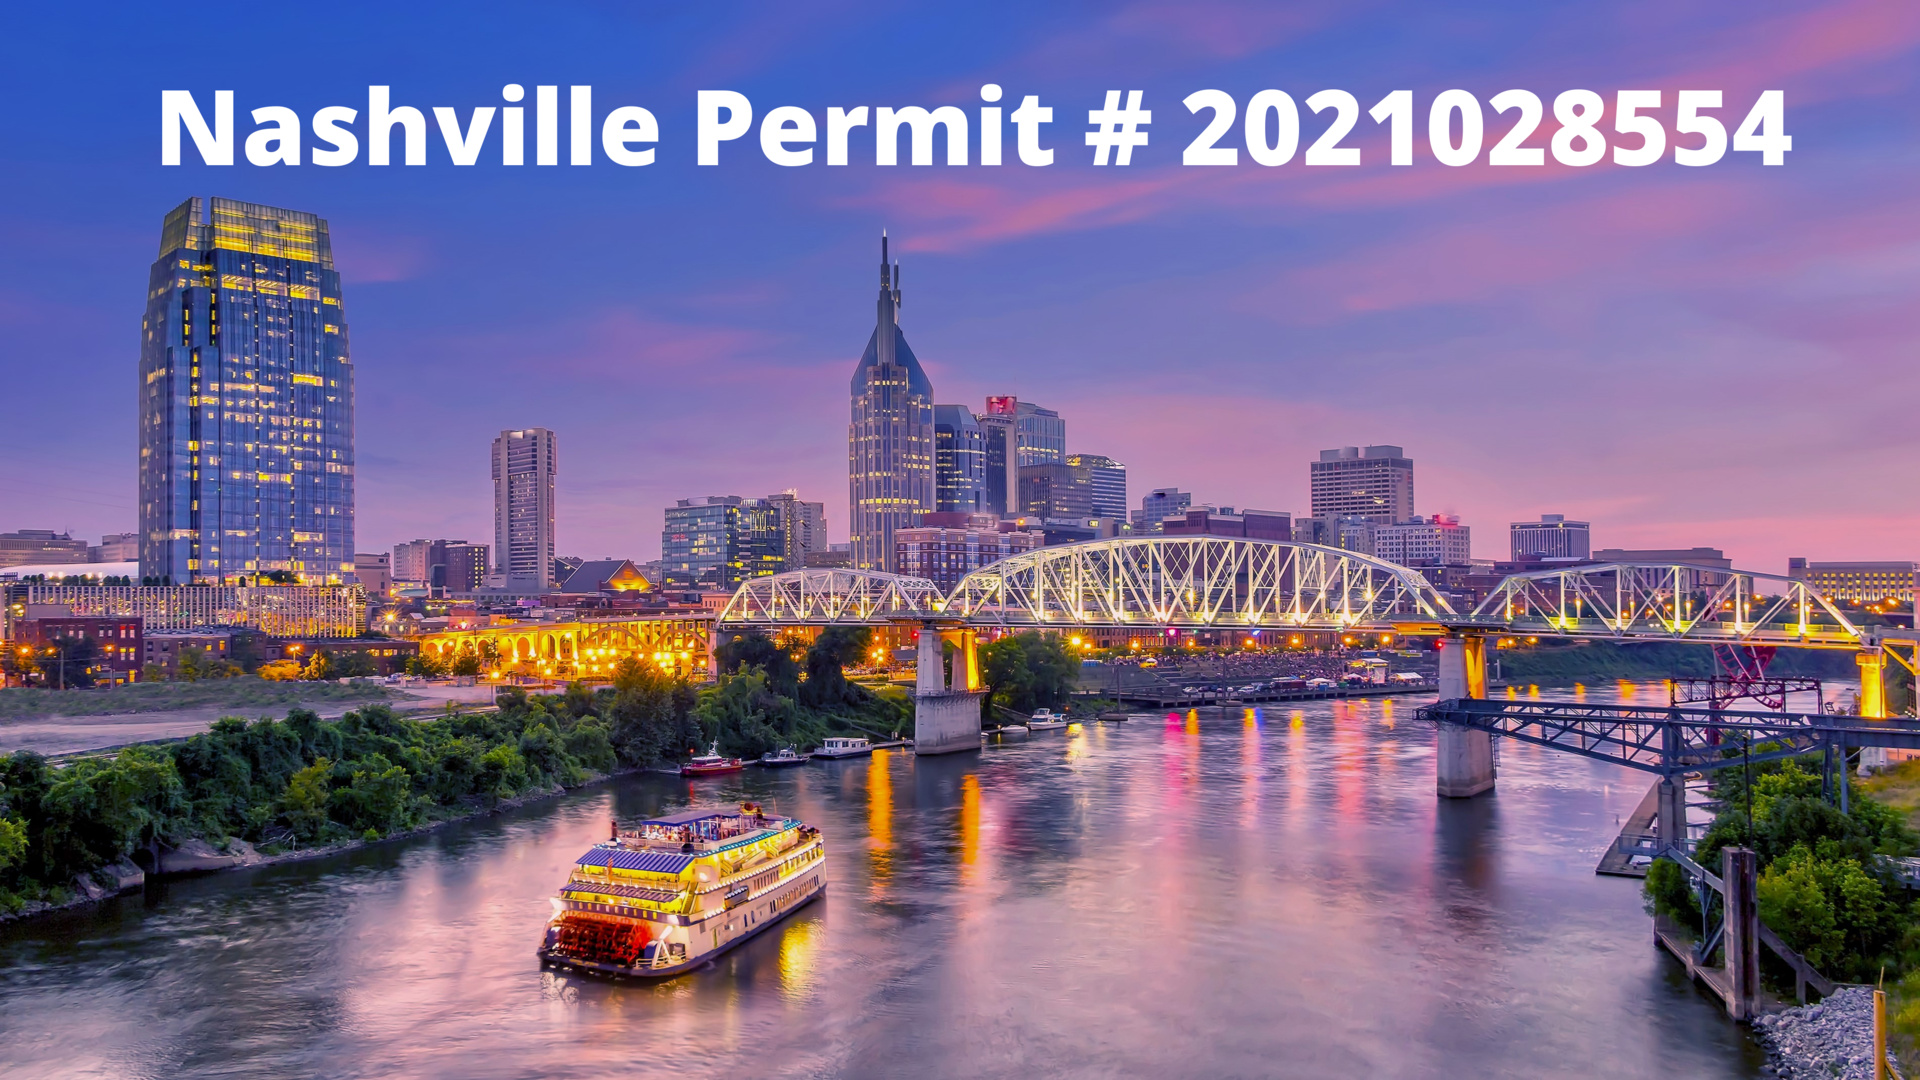 Nashville Permit Issued In 2021 followed by:2021028554 (2nd Unit)